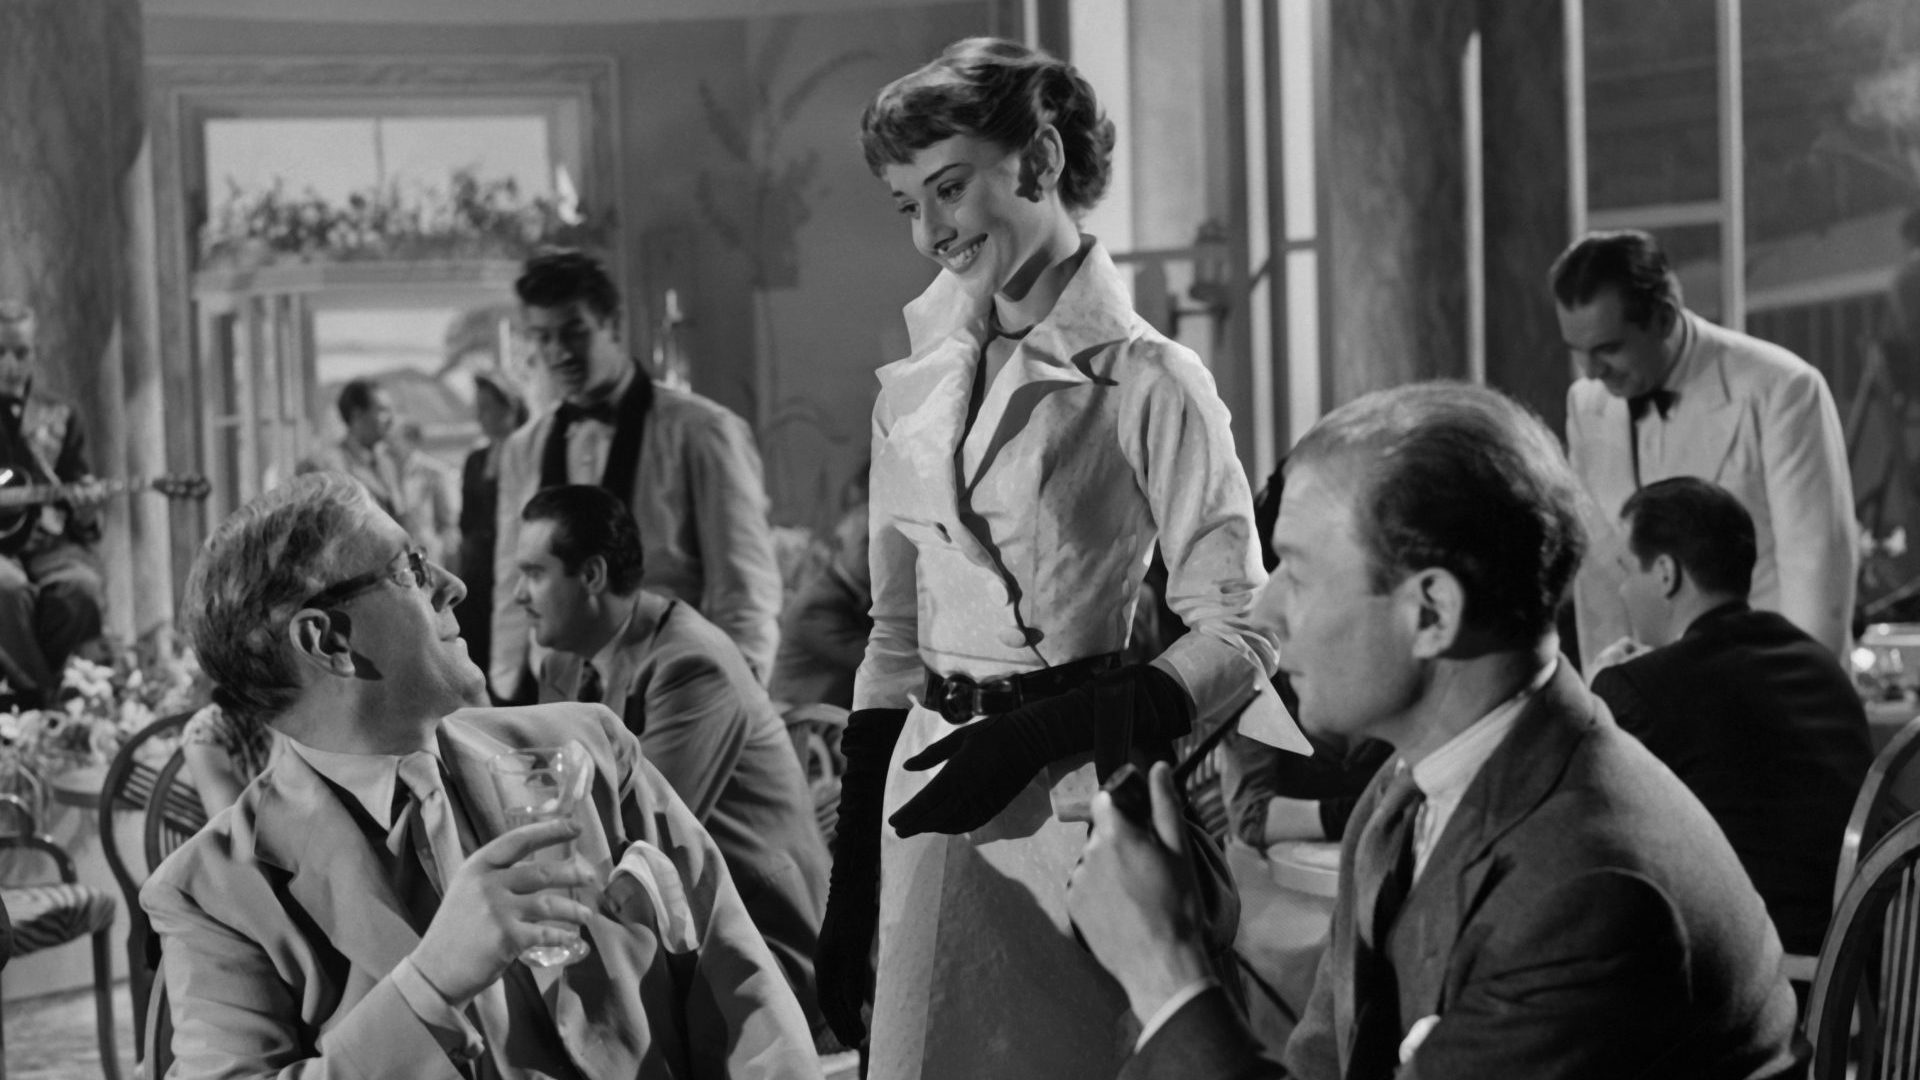 Audrey Hepburn and Alec Guinness in The Lavender Hill Mob. Photo: Getty